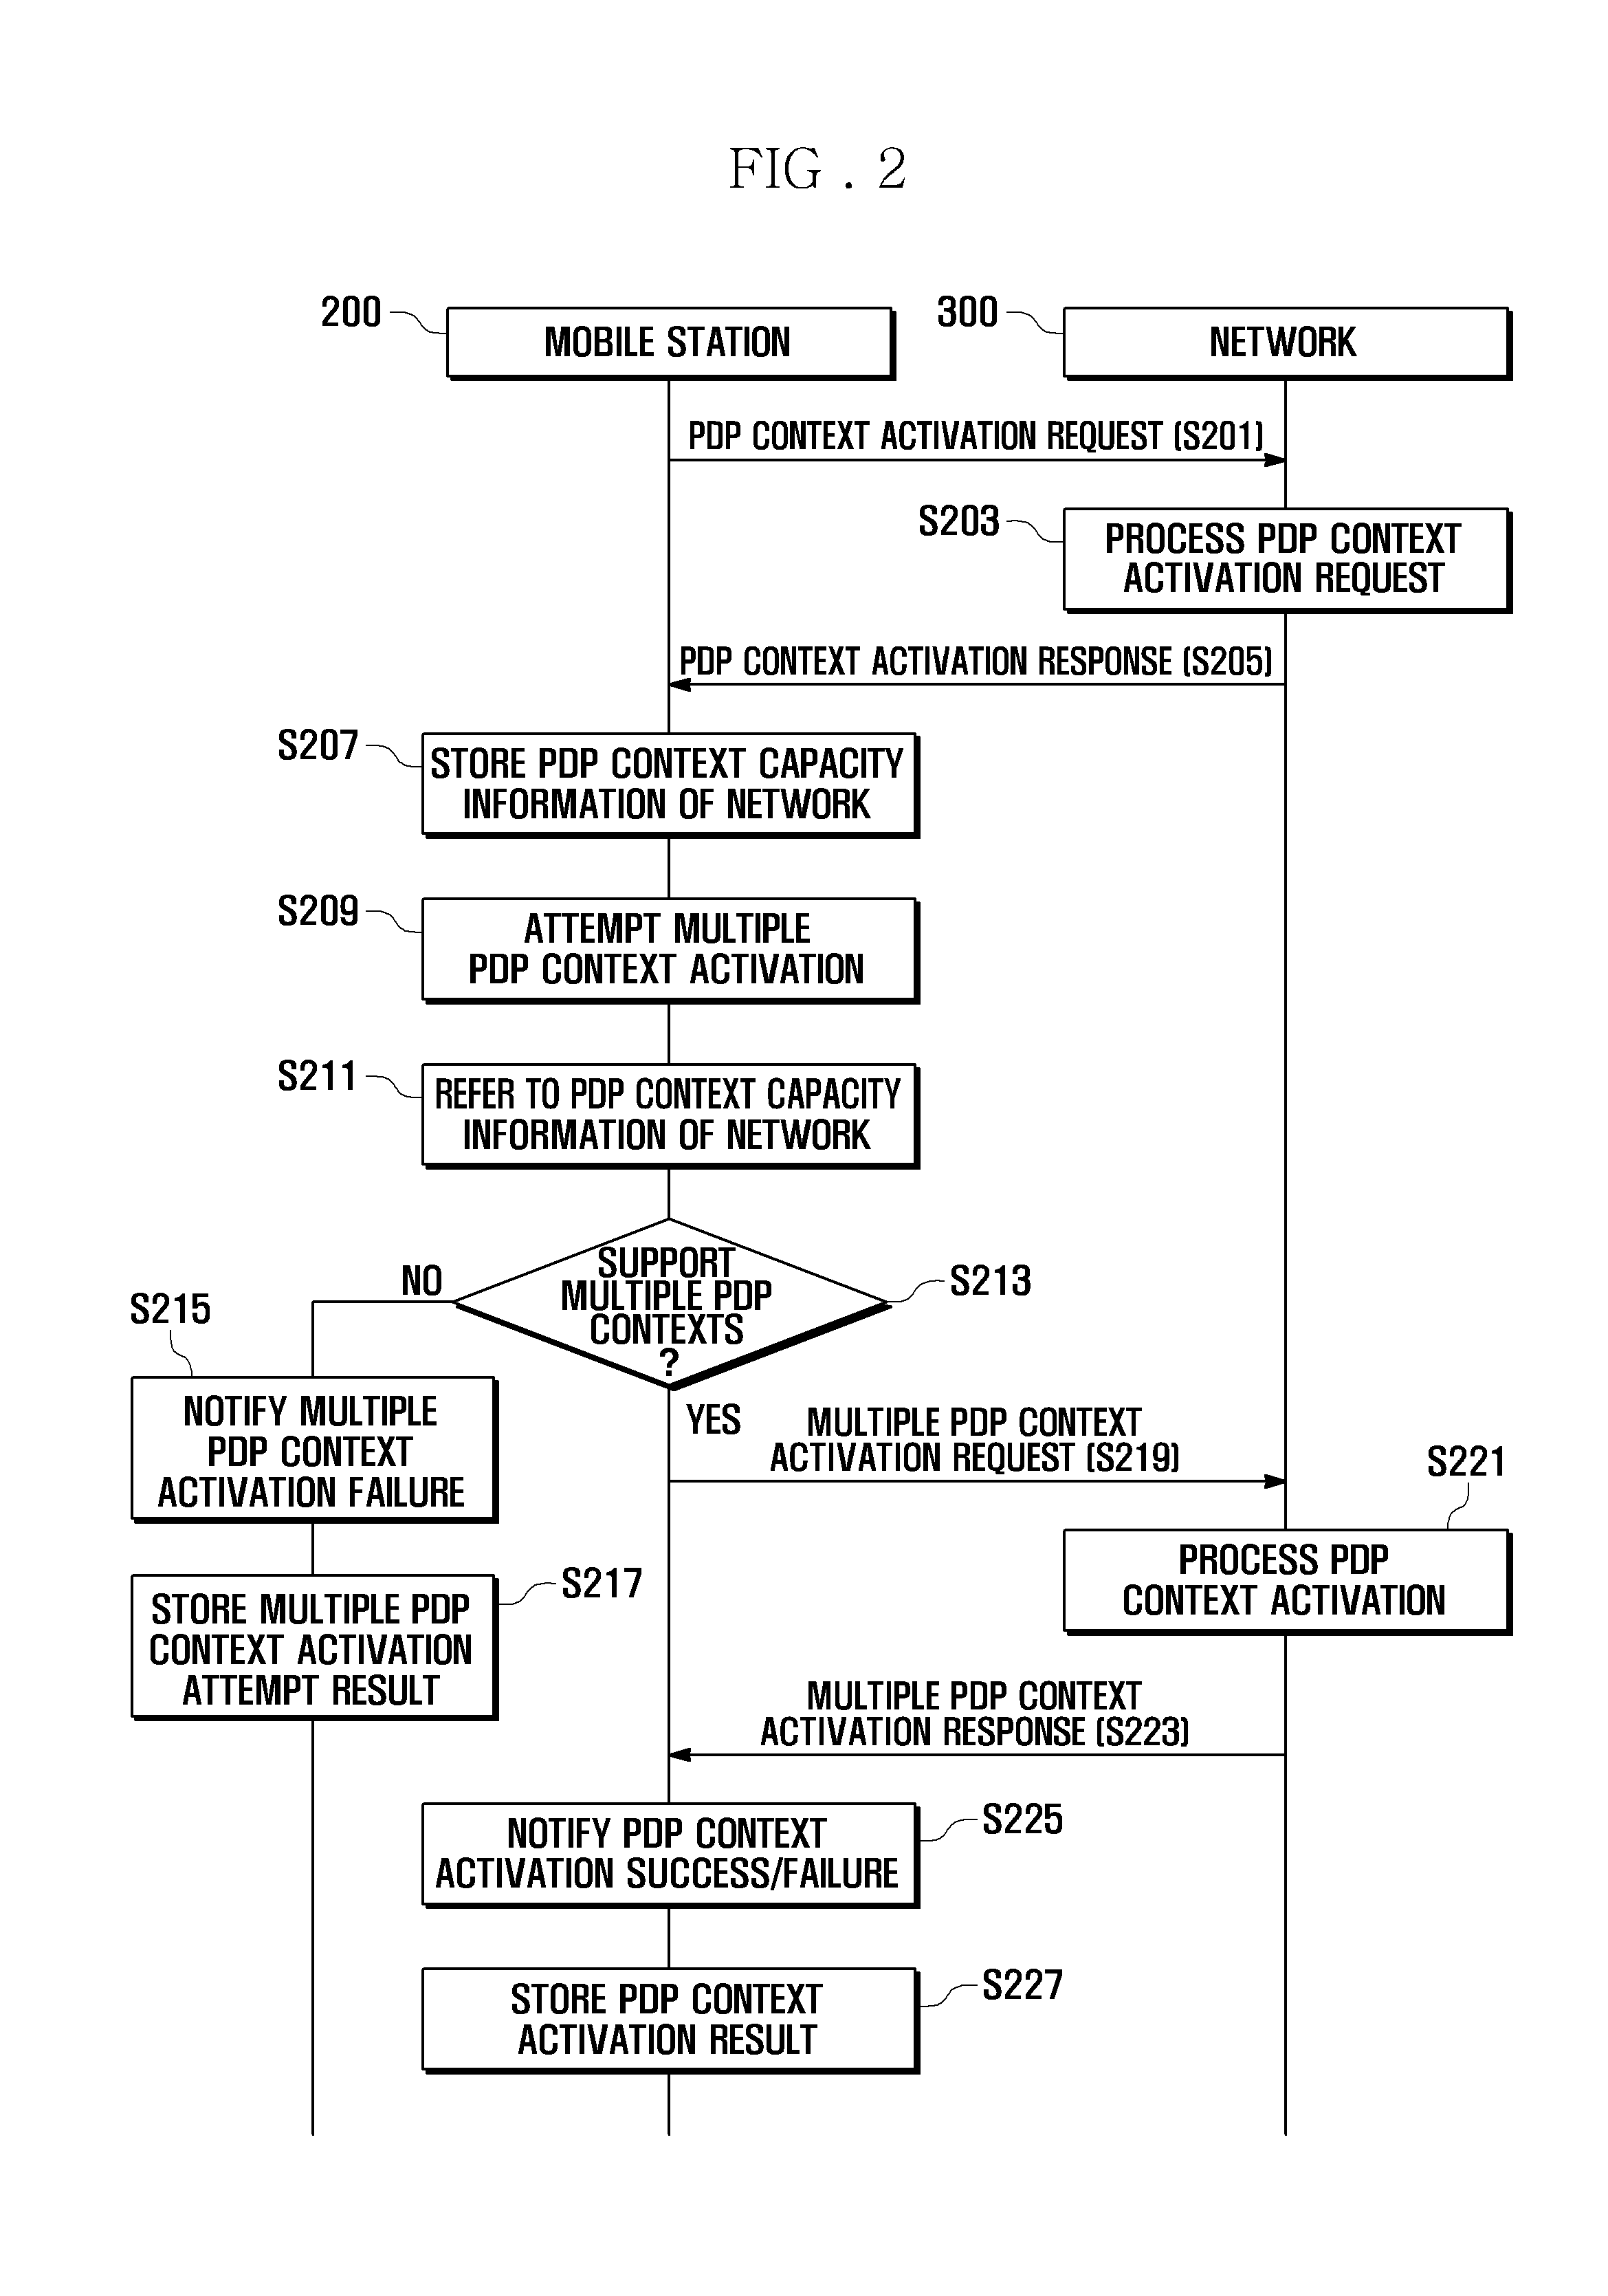 Packet data protocol context management method for a mobile station